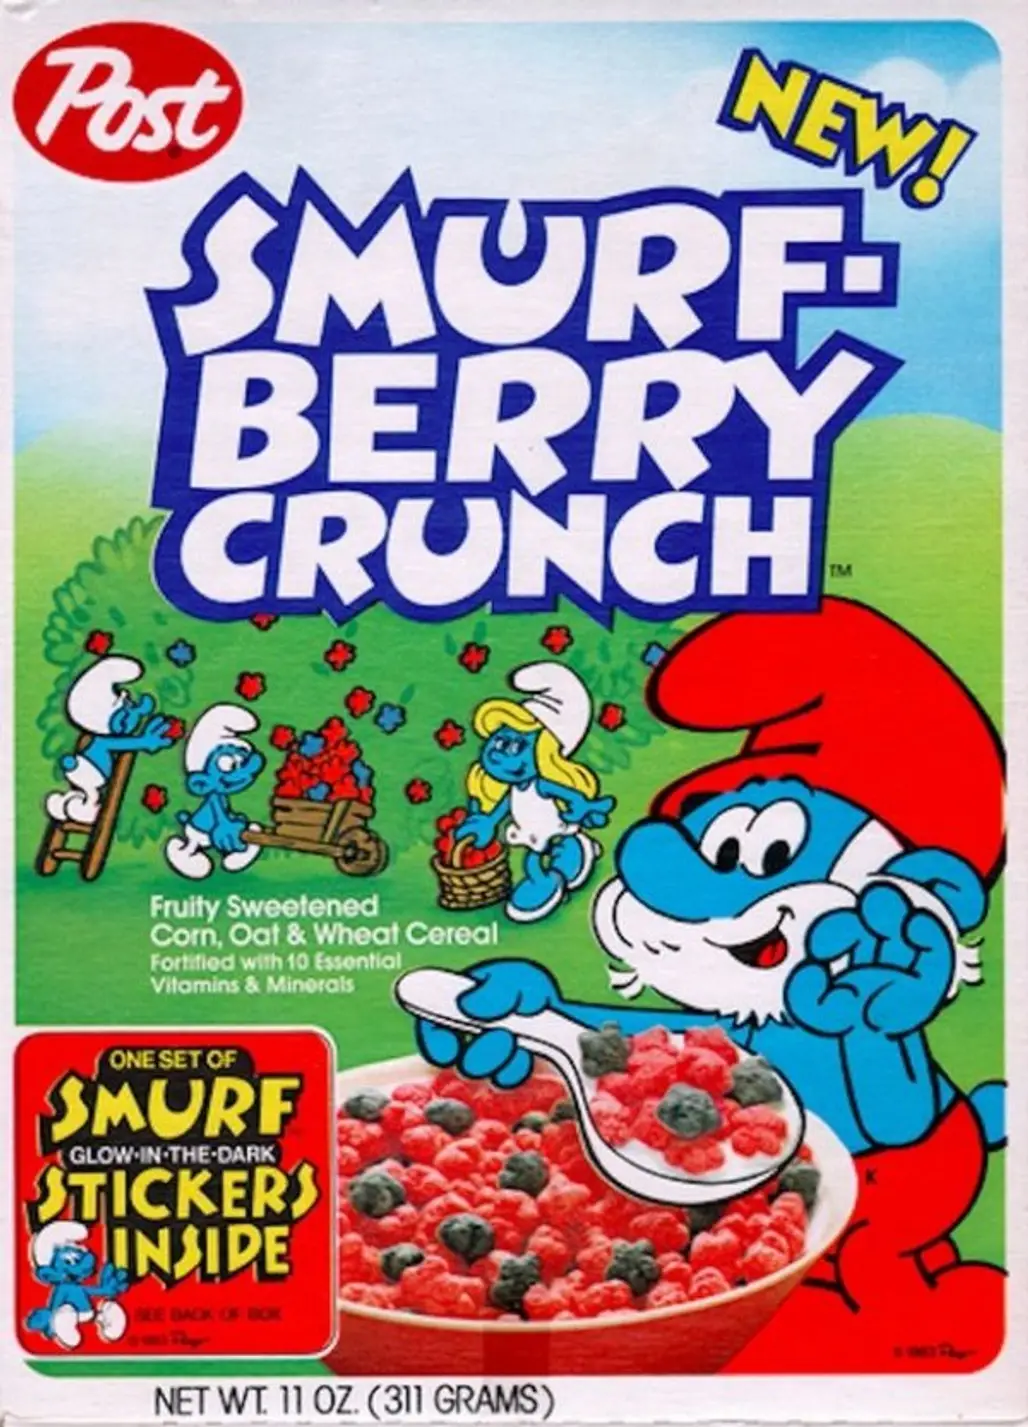 Smurf-Berry Crunch Cereal